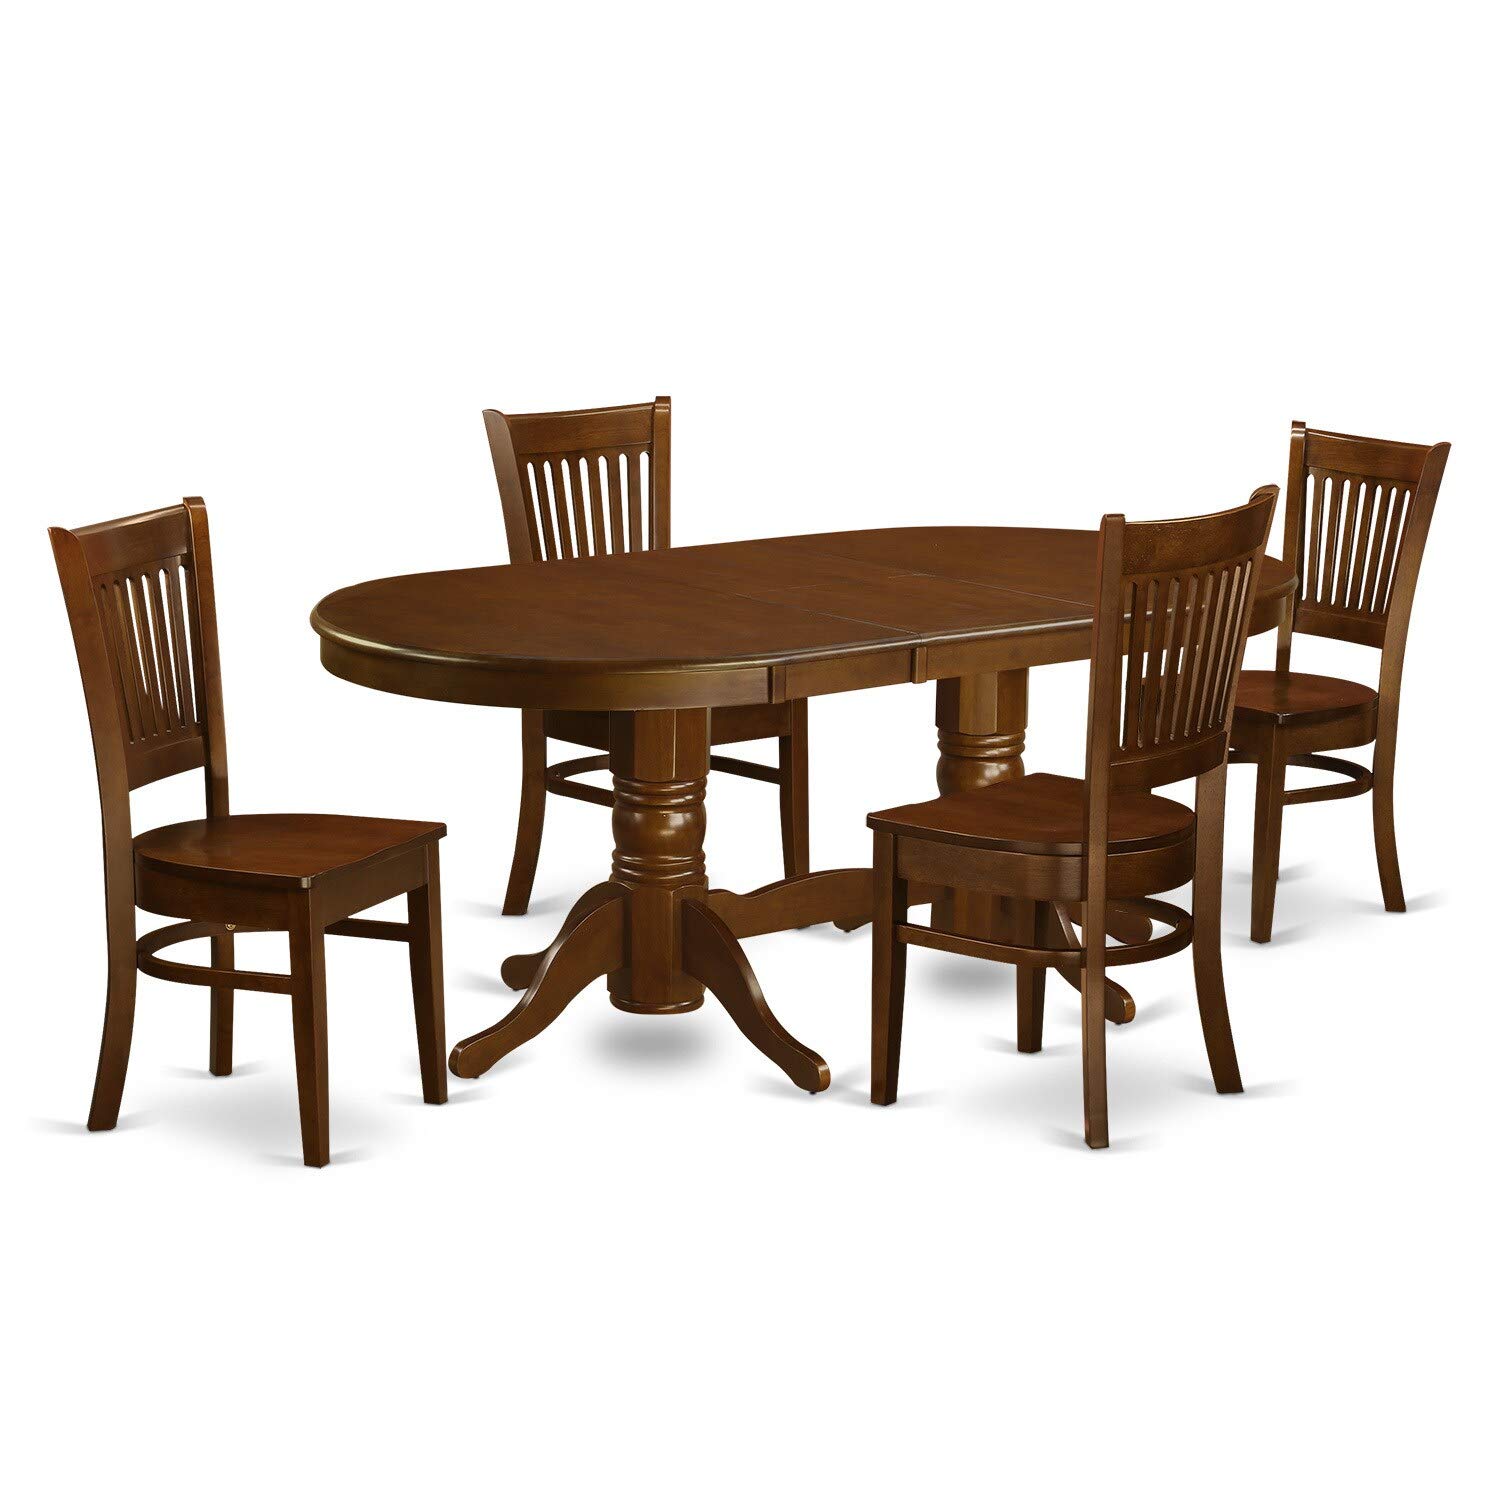 East West Furniture Modern Dining Table Set Includes an...